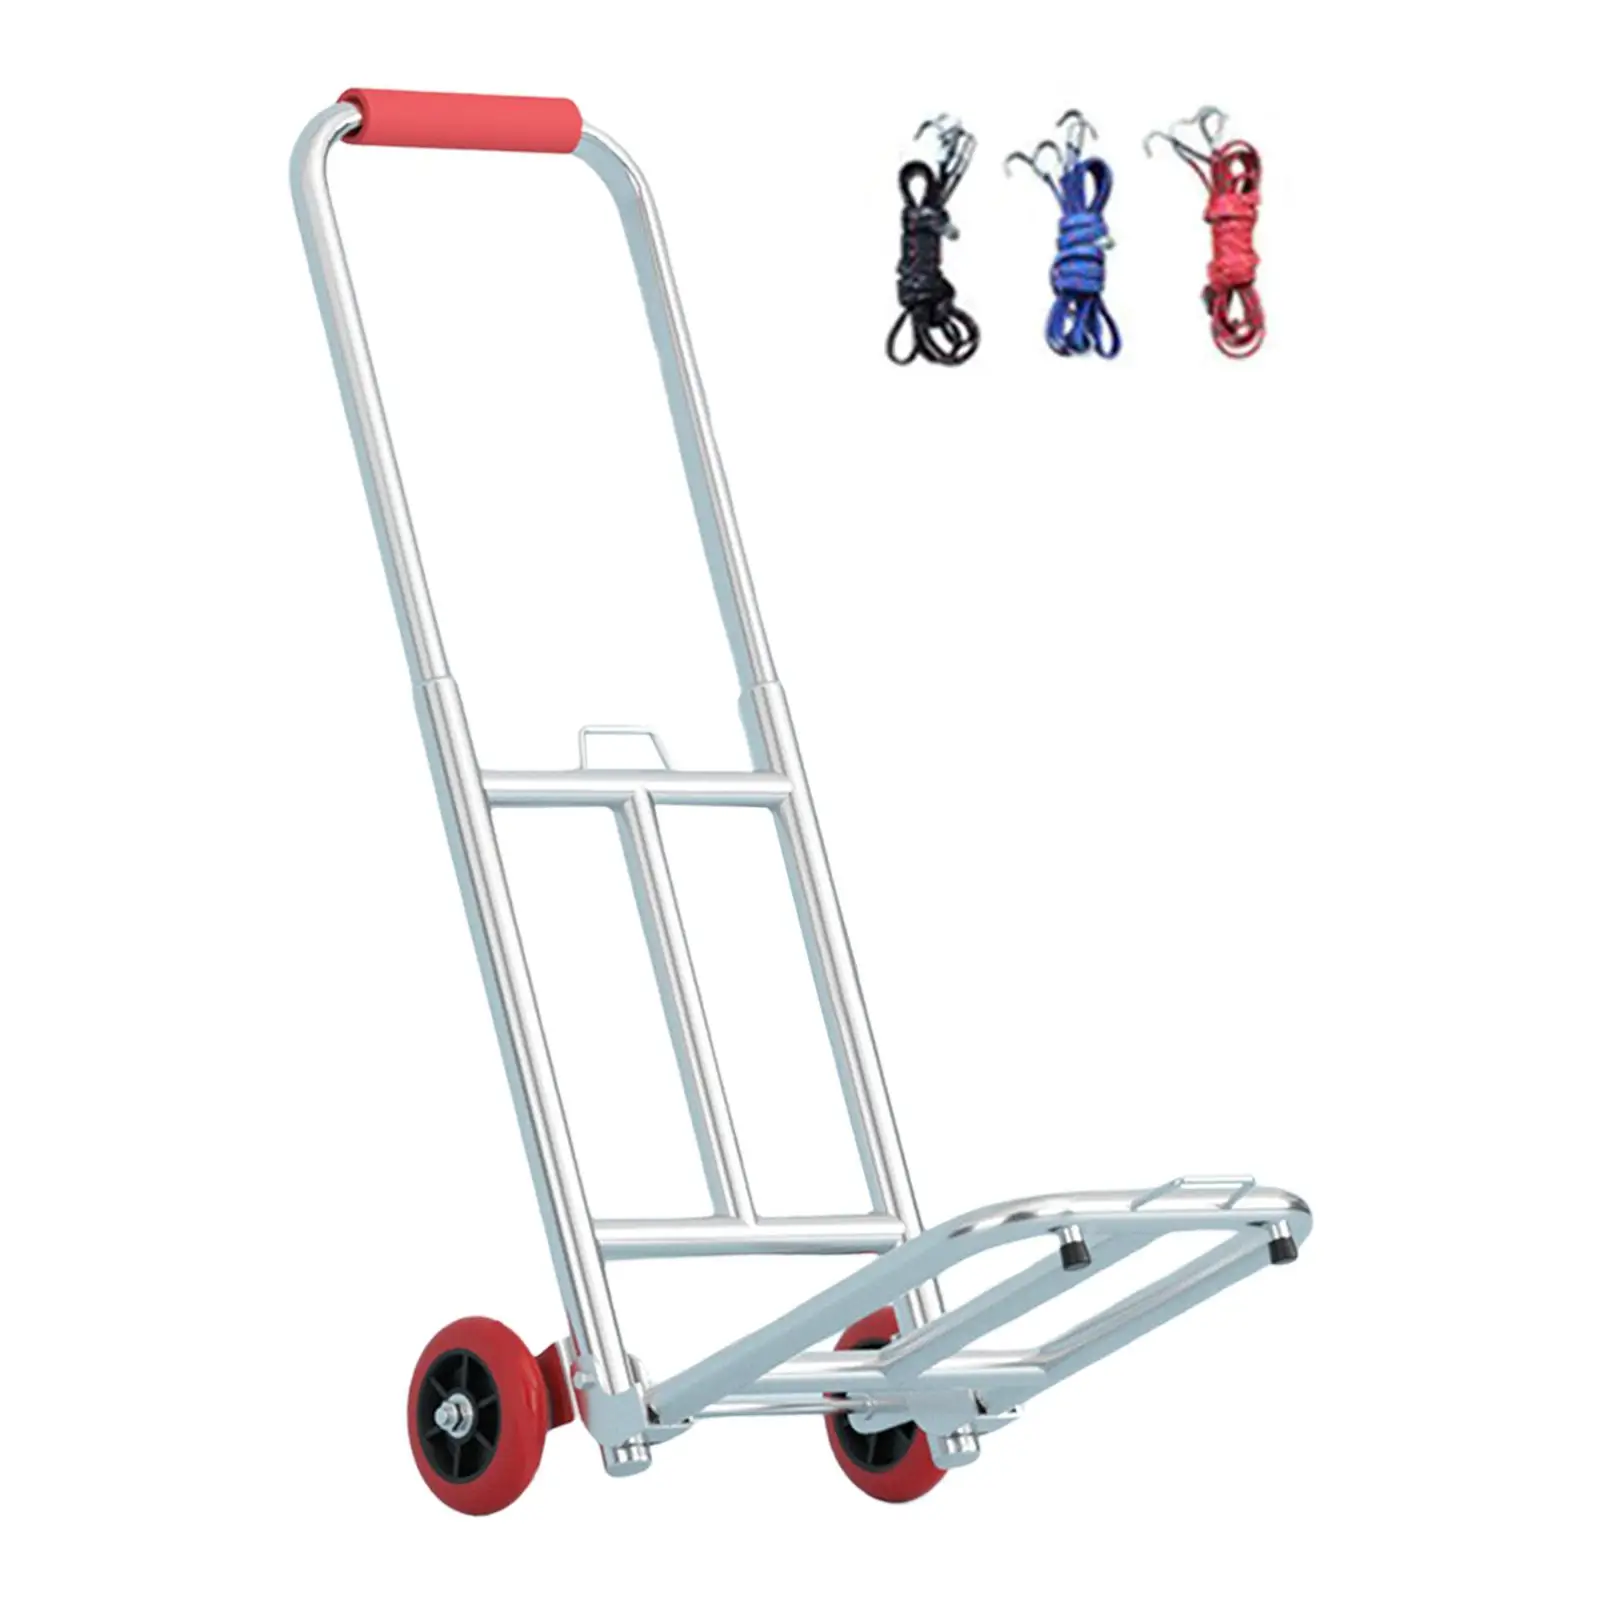 Folding Hand Truck 2 Wheel Compact Adjustable Foldable Roller Shopping Trolley